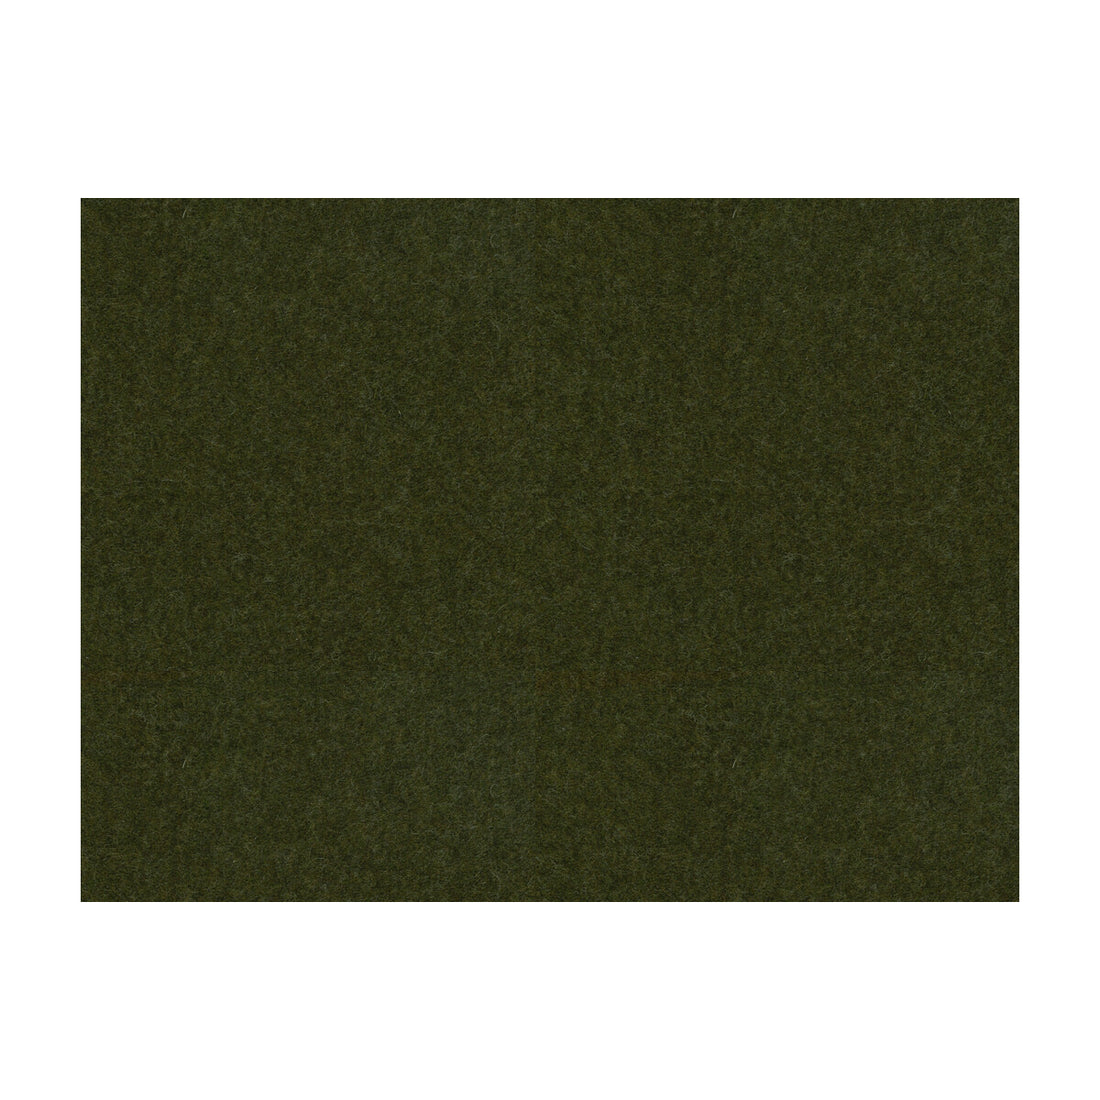 Chevalier Wool fabric in evergreen color - pattern 8013149.3030.0 - by Brunschwig &amp; Fils